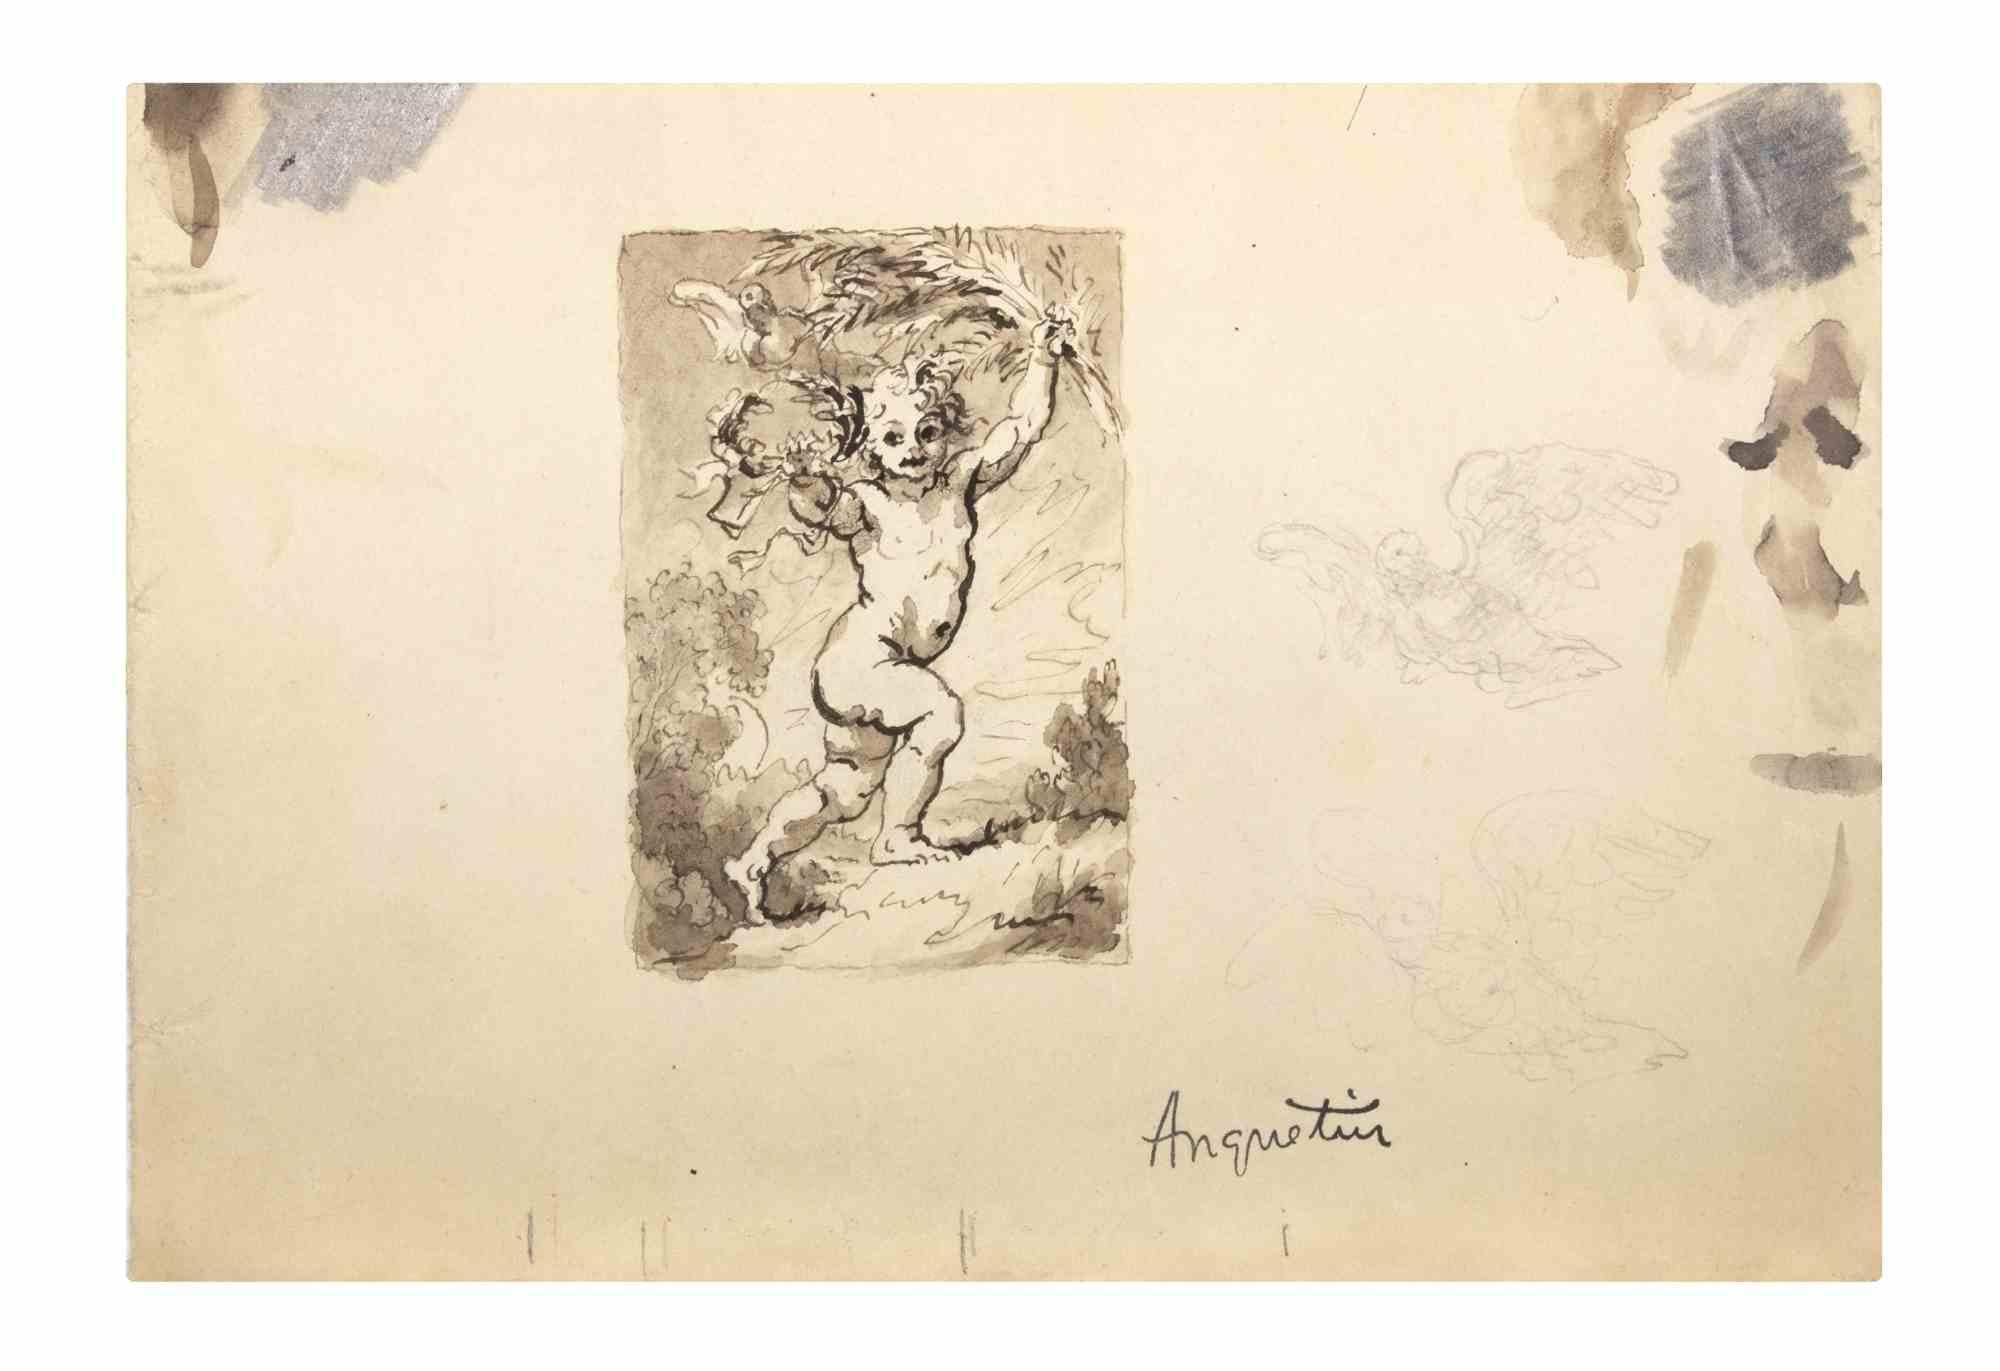 The Angel is an ink drawing on paper realized in the early 20th Century by Louis Anquetin (1861-1932).

Hand-signed on the lower.

Good condition with slight foxing.

Louis Émile Anquetin (26 January 1861 – 19 August 1932) was a French painter. In